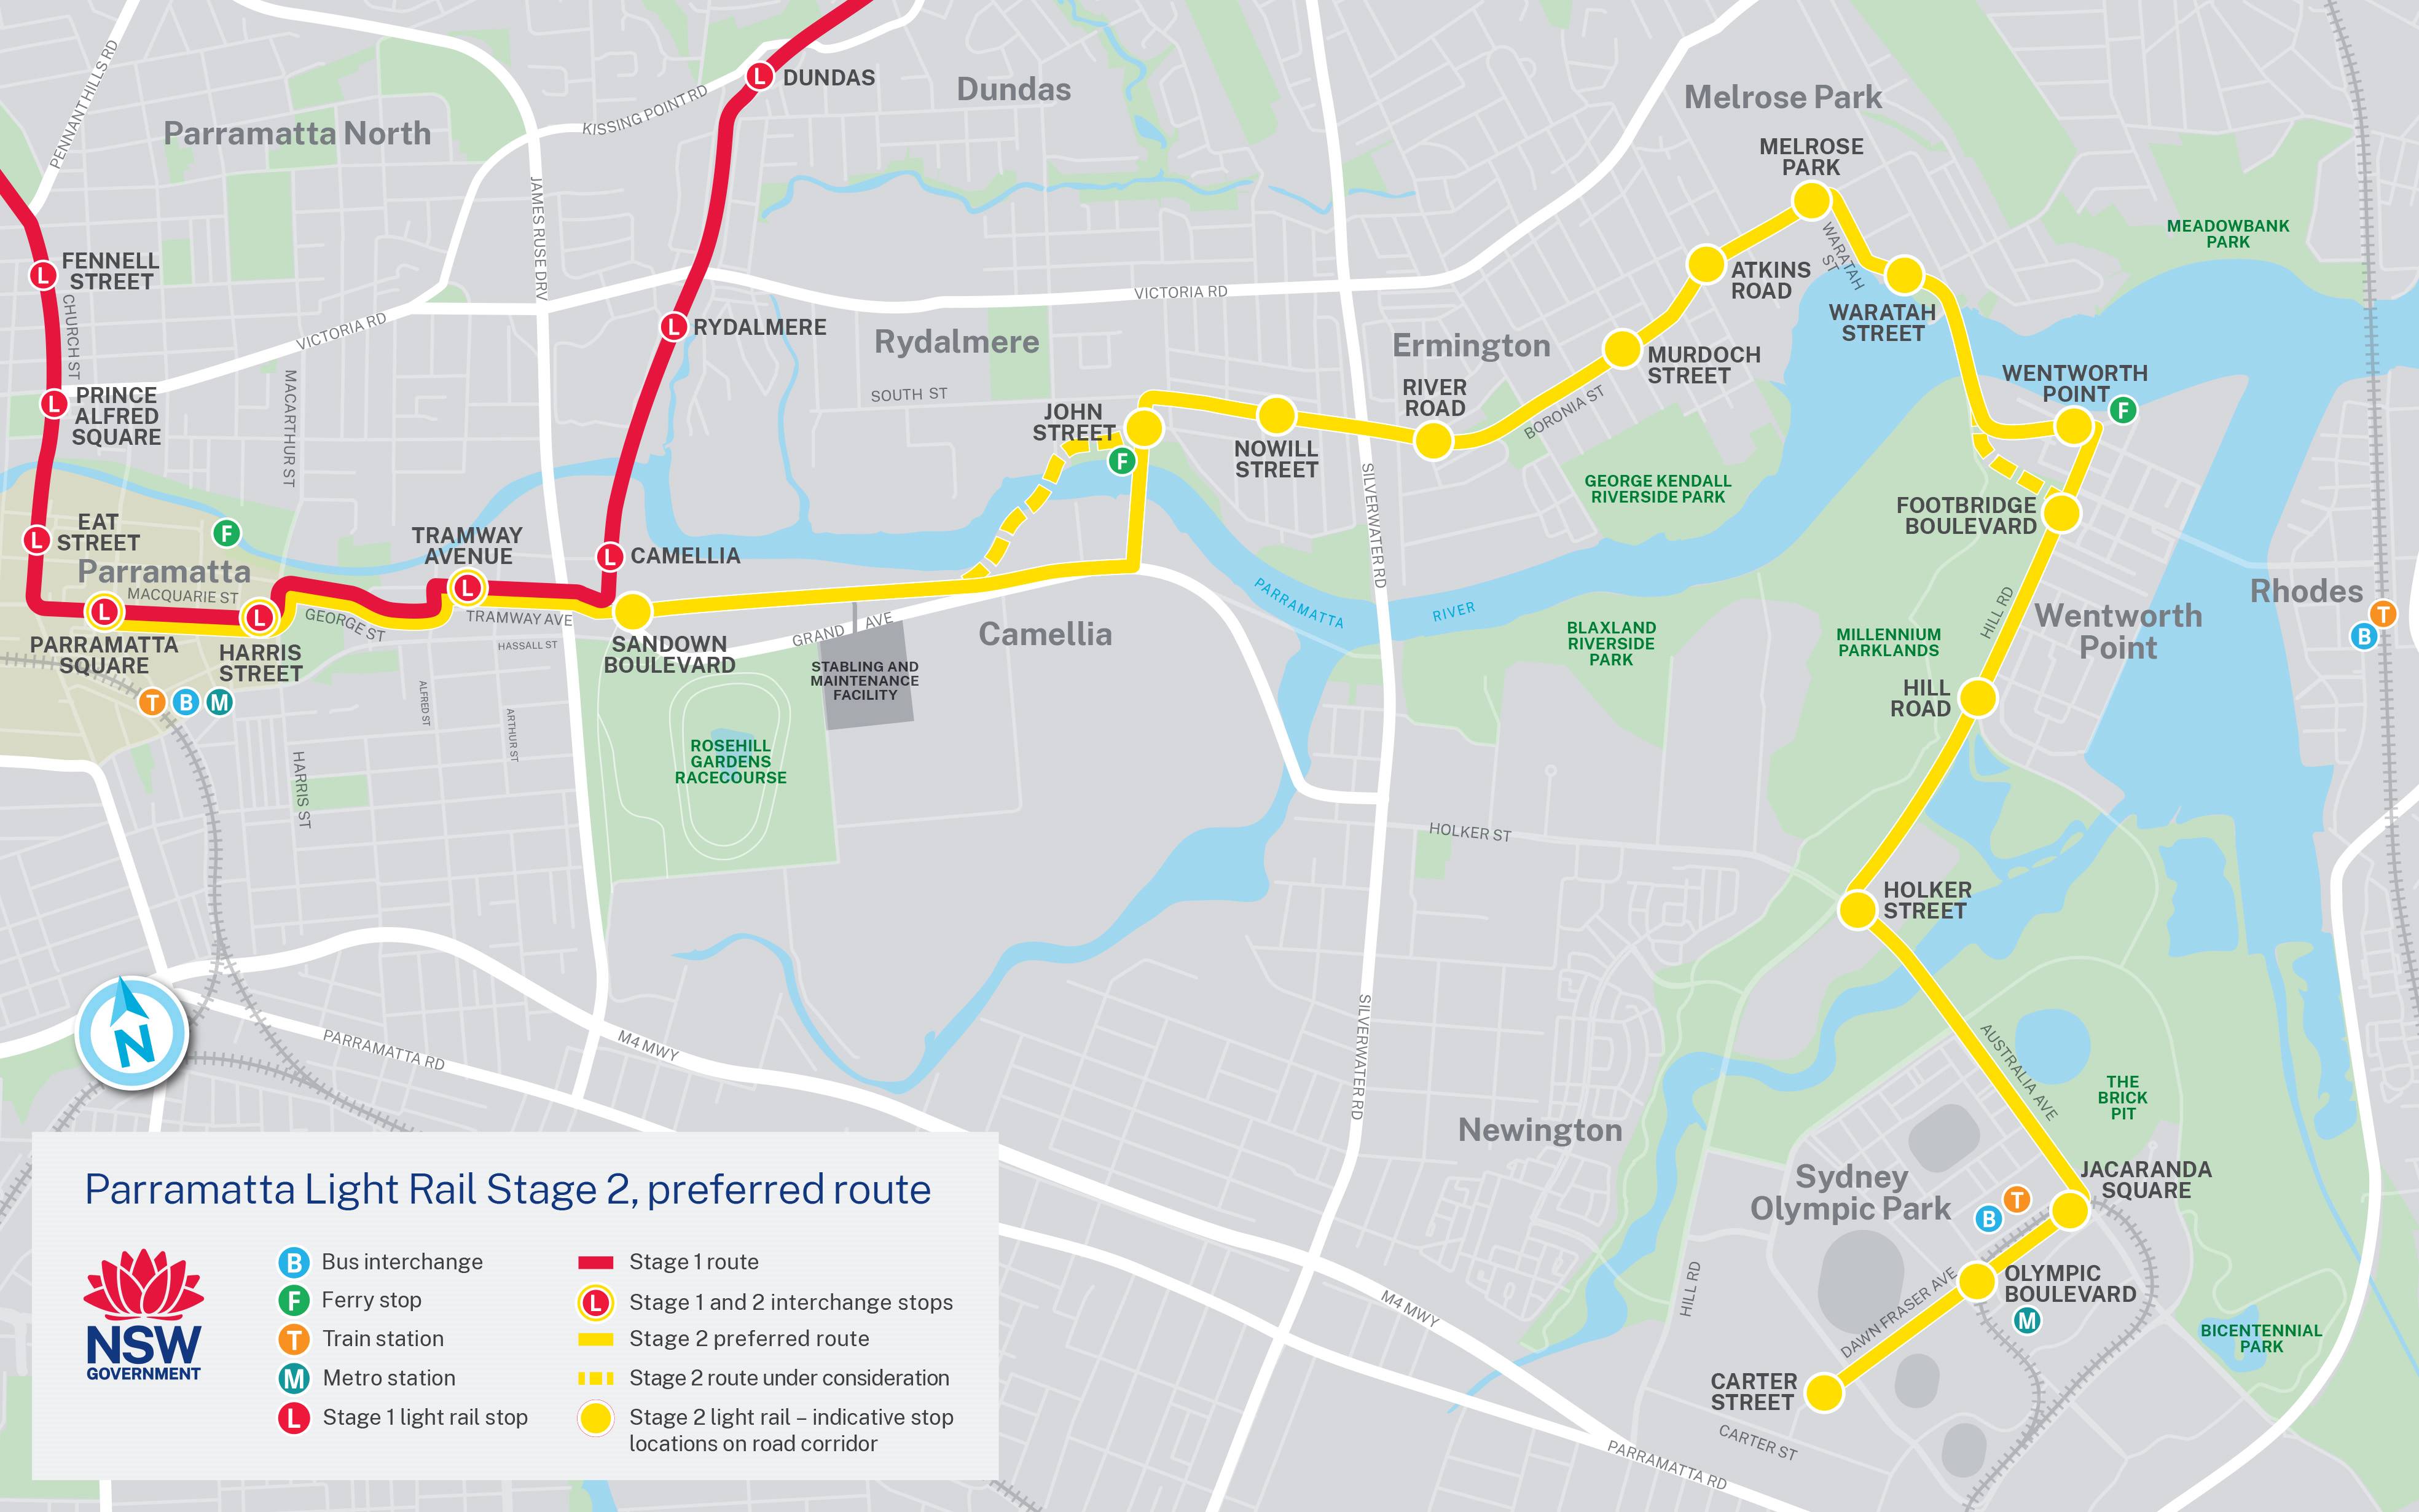 Stage 2 Parramatta Light Rail operational map confirming the preferred Stage 2 route which will travel south of the Parramatta River, through Camellia in the proposed Camellia-Rosehill Precinct, before crossing the river to Rydalmere.